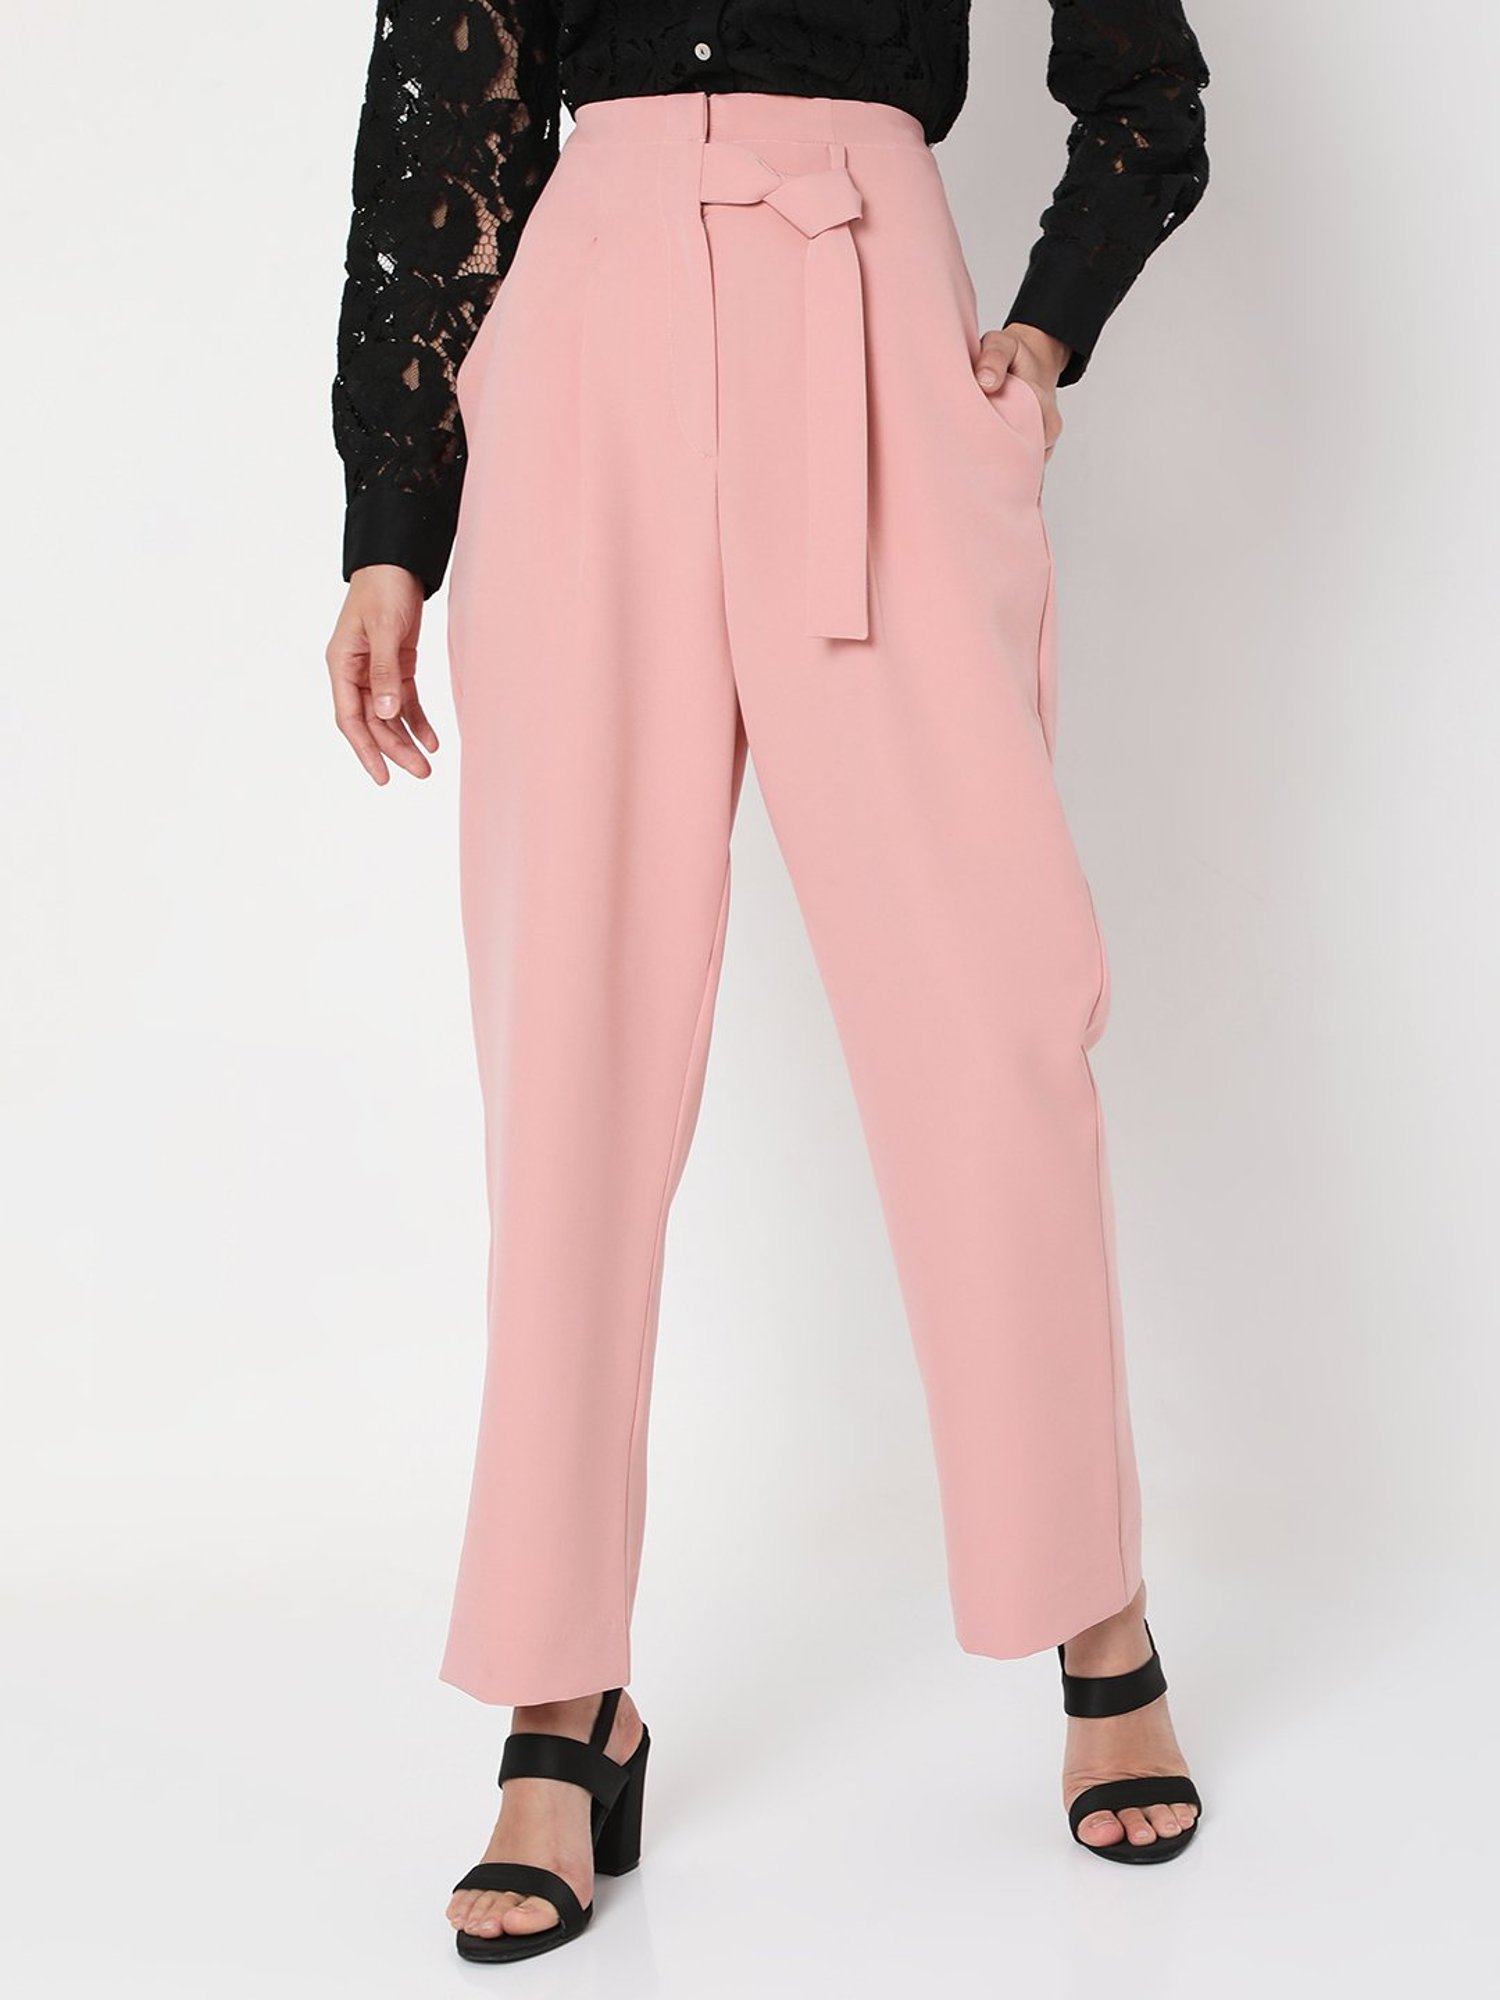 Alexander McQueen High Waisted Cigarette Pant in Orchid Pink | FWRD